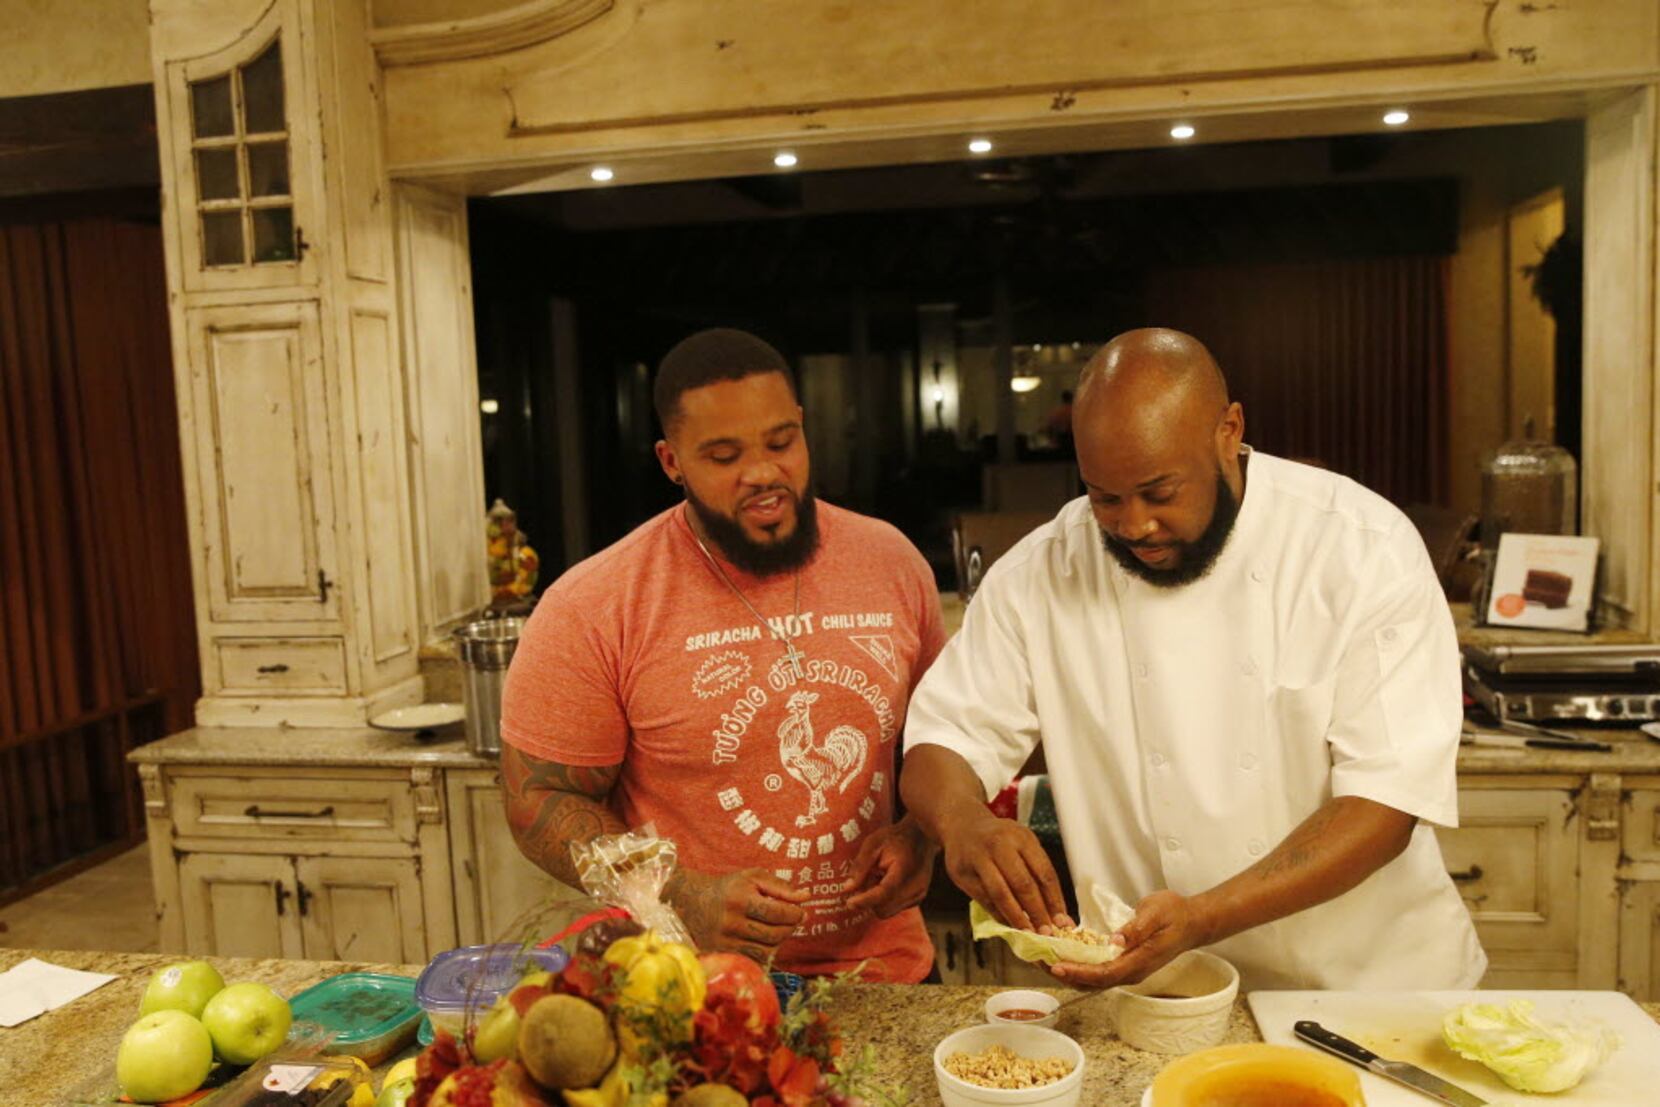 Ticker: Ex-Tiger Prince Fielder doesn't care about weight